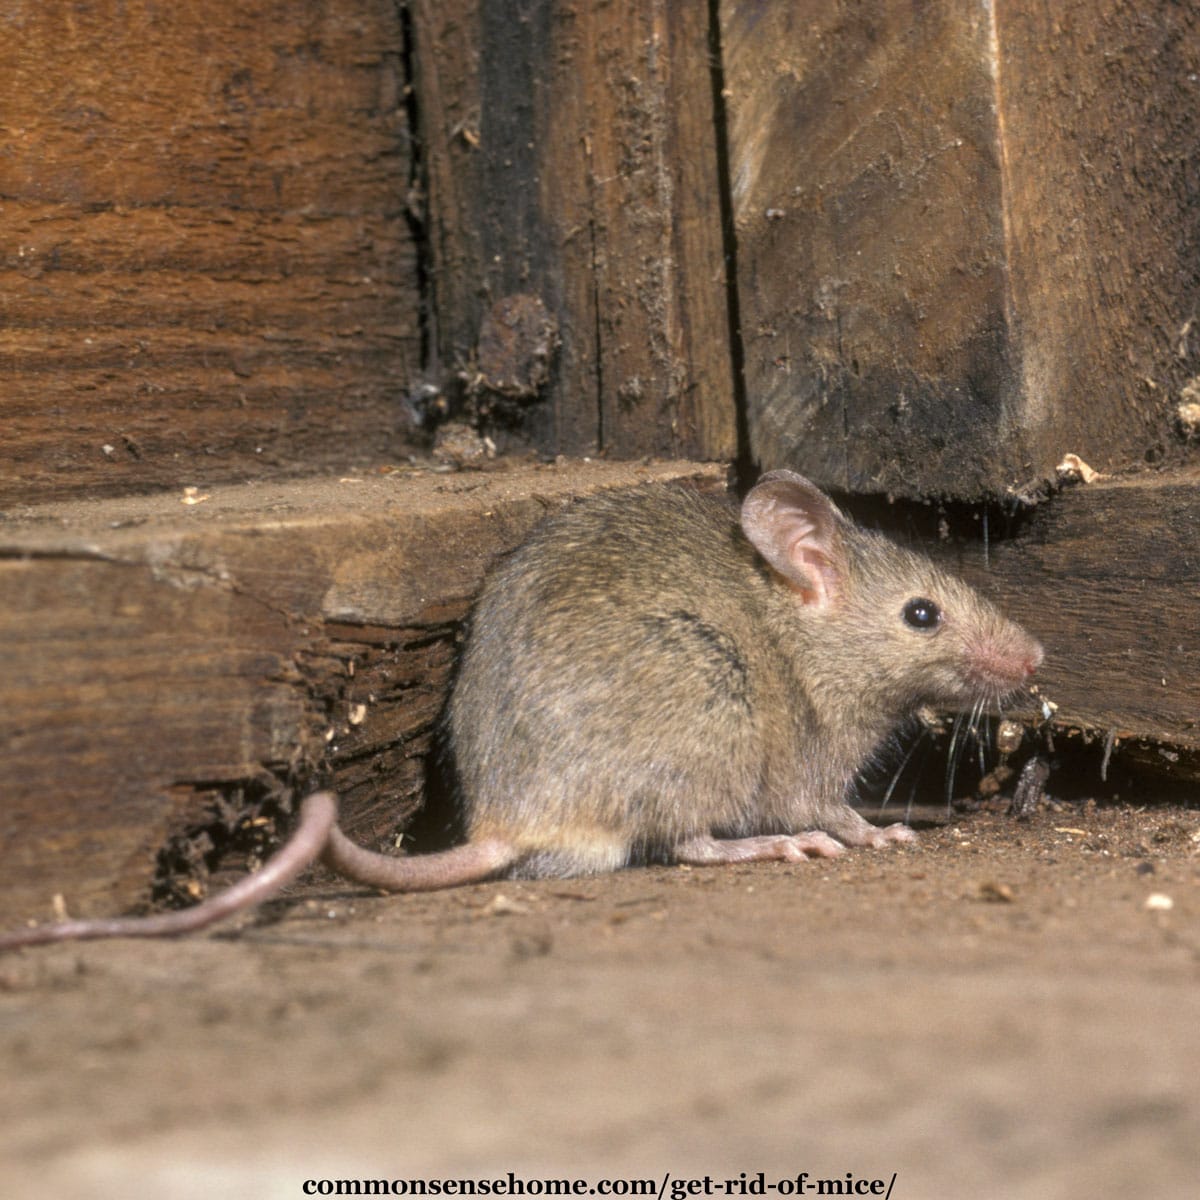 Can Rat Poison Kill Humans?